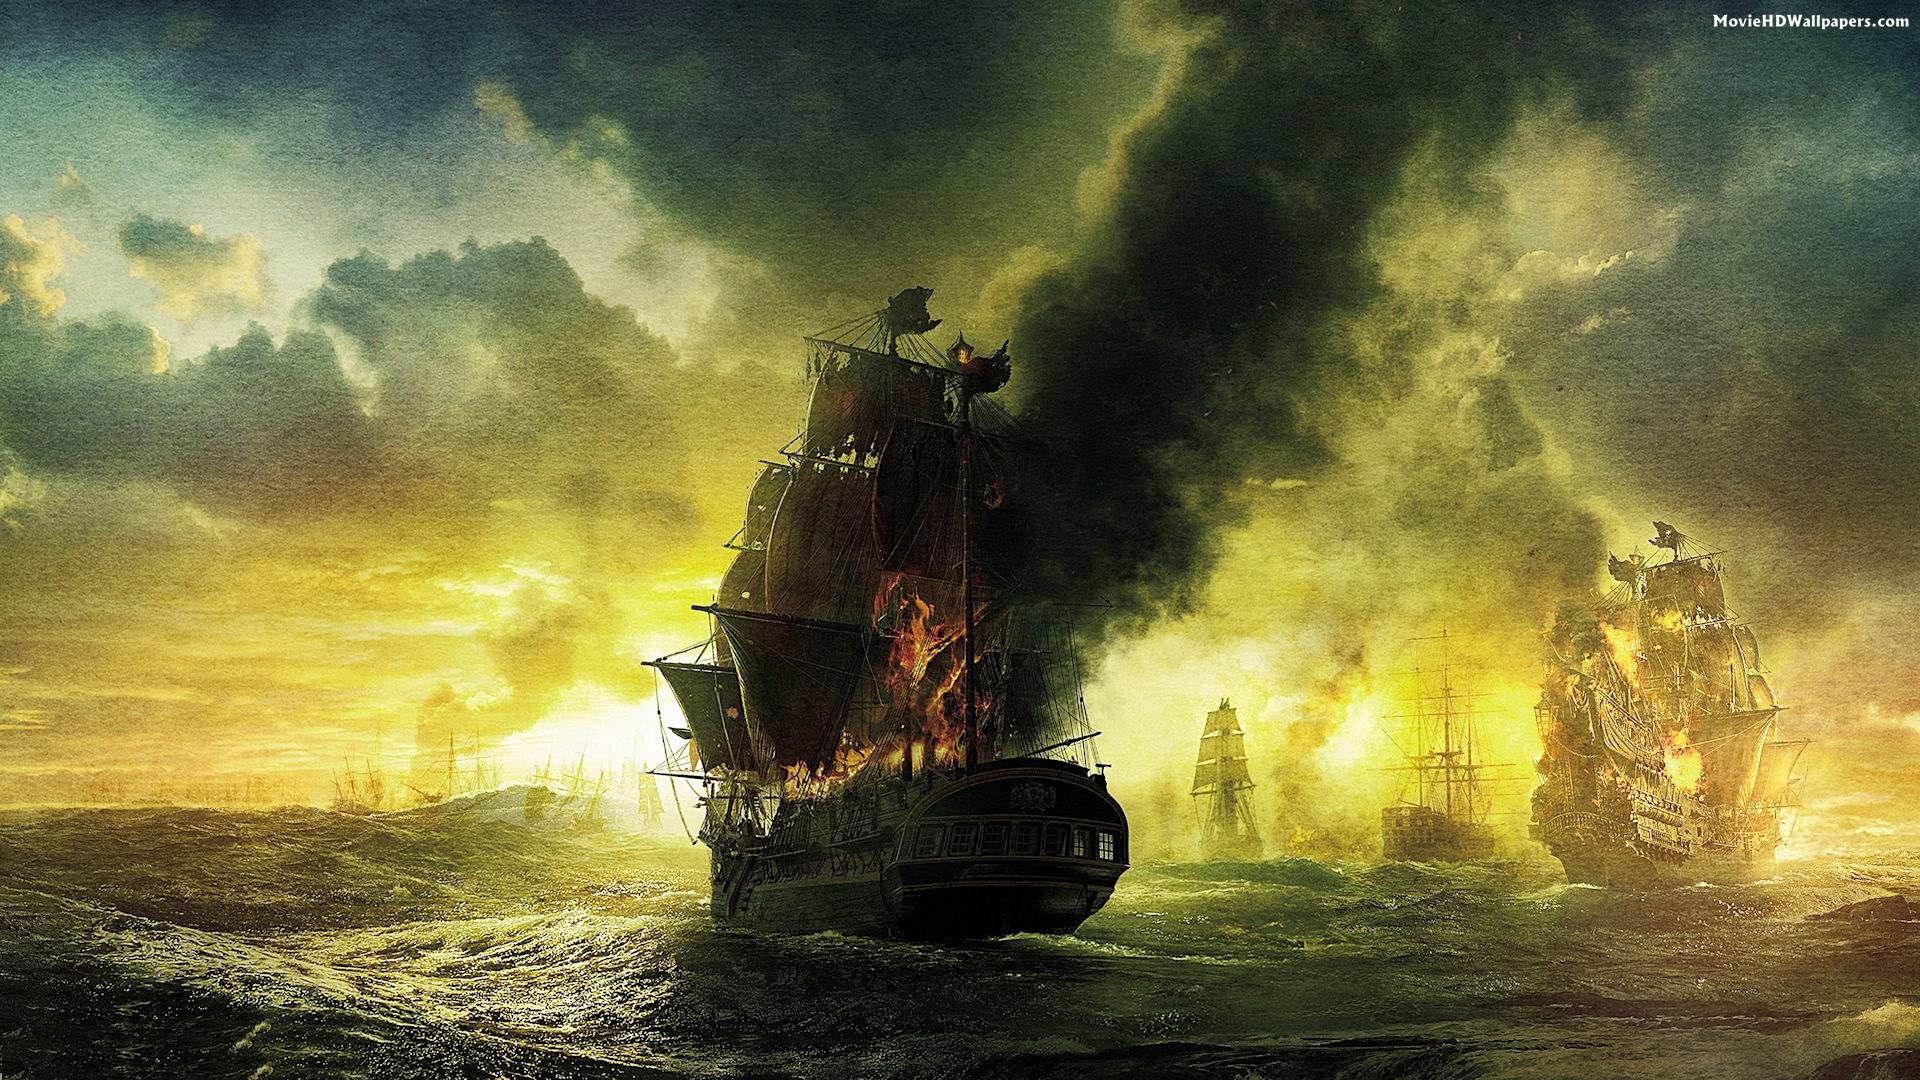 Pirates Of The Caribbean: On Stranger Tides Wallpapers